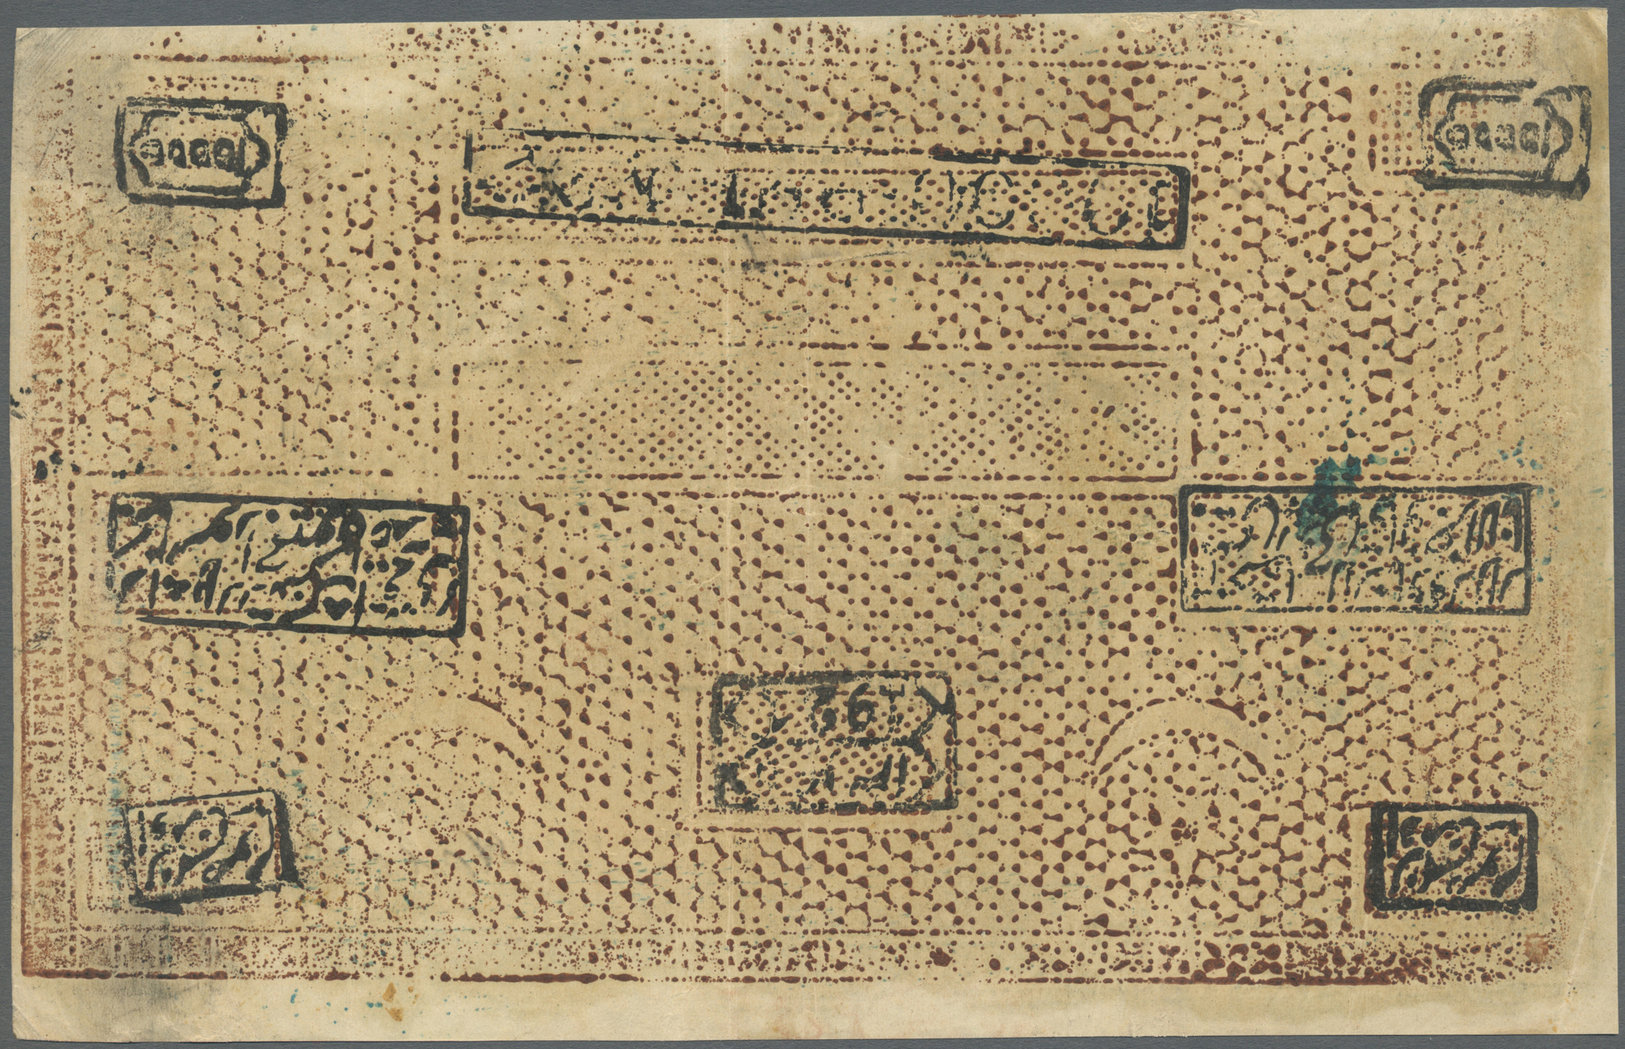 03463 Uzbekistan / Usbekistan: 10.000 Rubles 1921 P. S1040, Seferal Folds And Light Creases In Paper, No Holes Or Tears, - Ouzbékistan